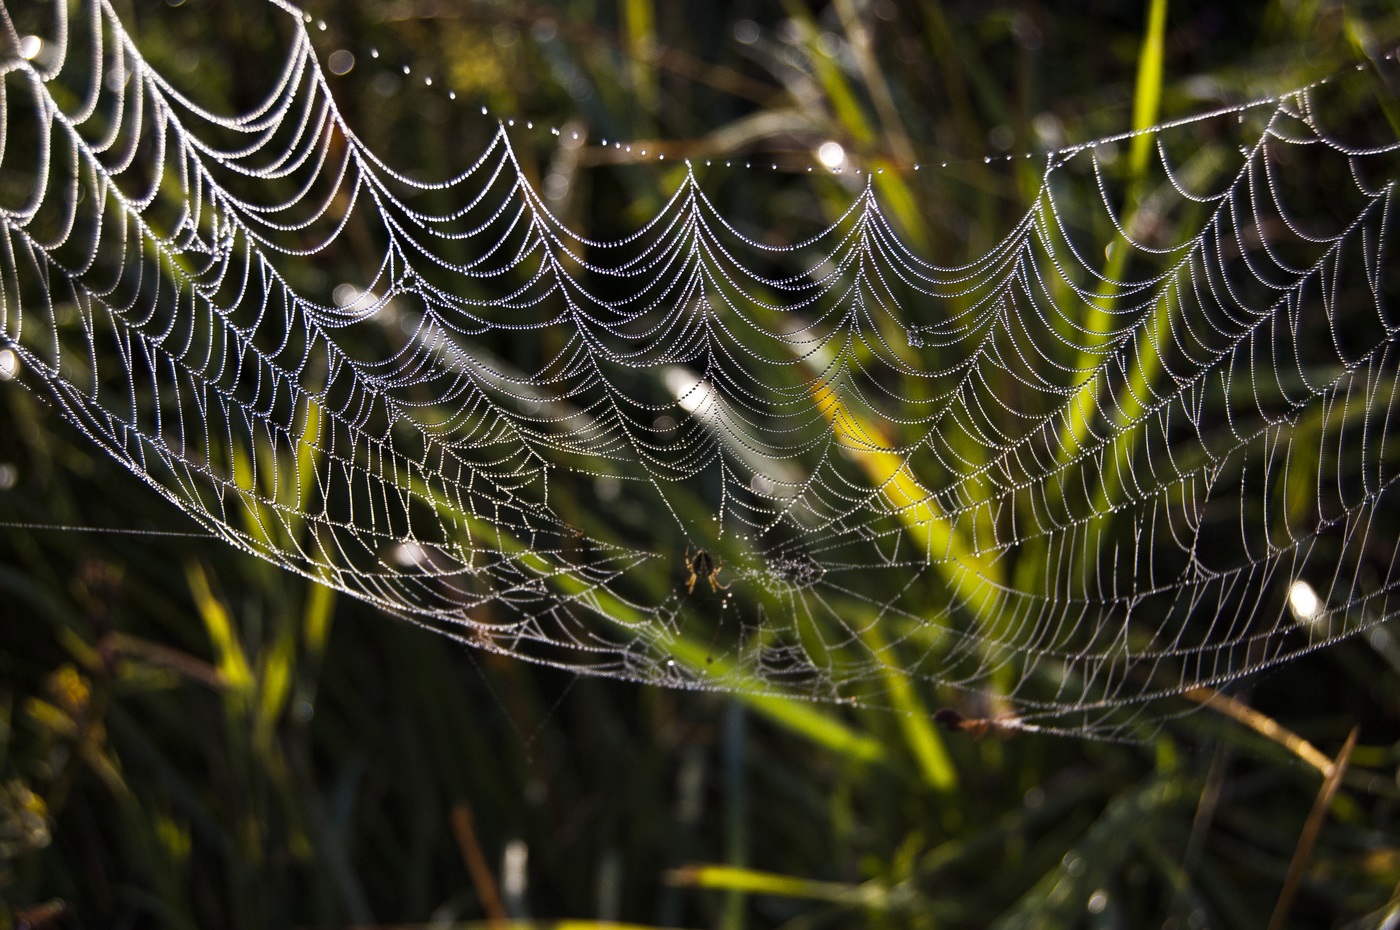 Photos of the web. Morning. Dawn. Dew drops on the web